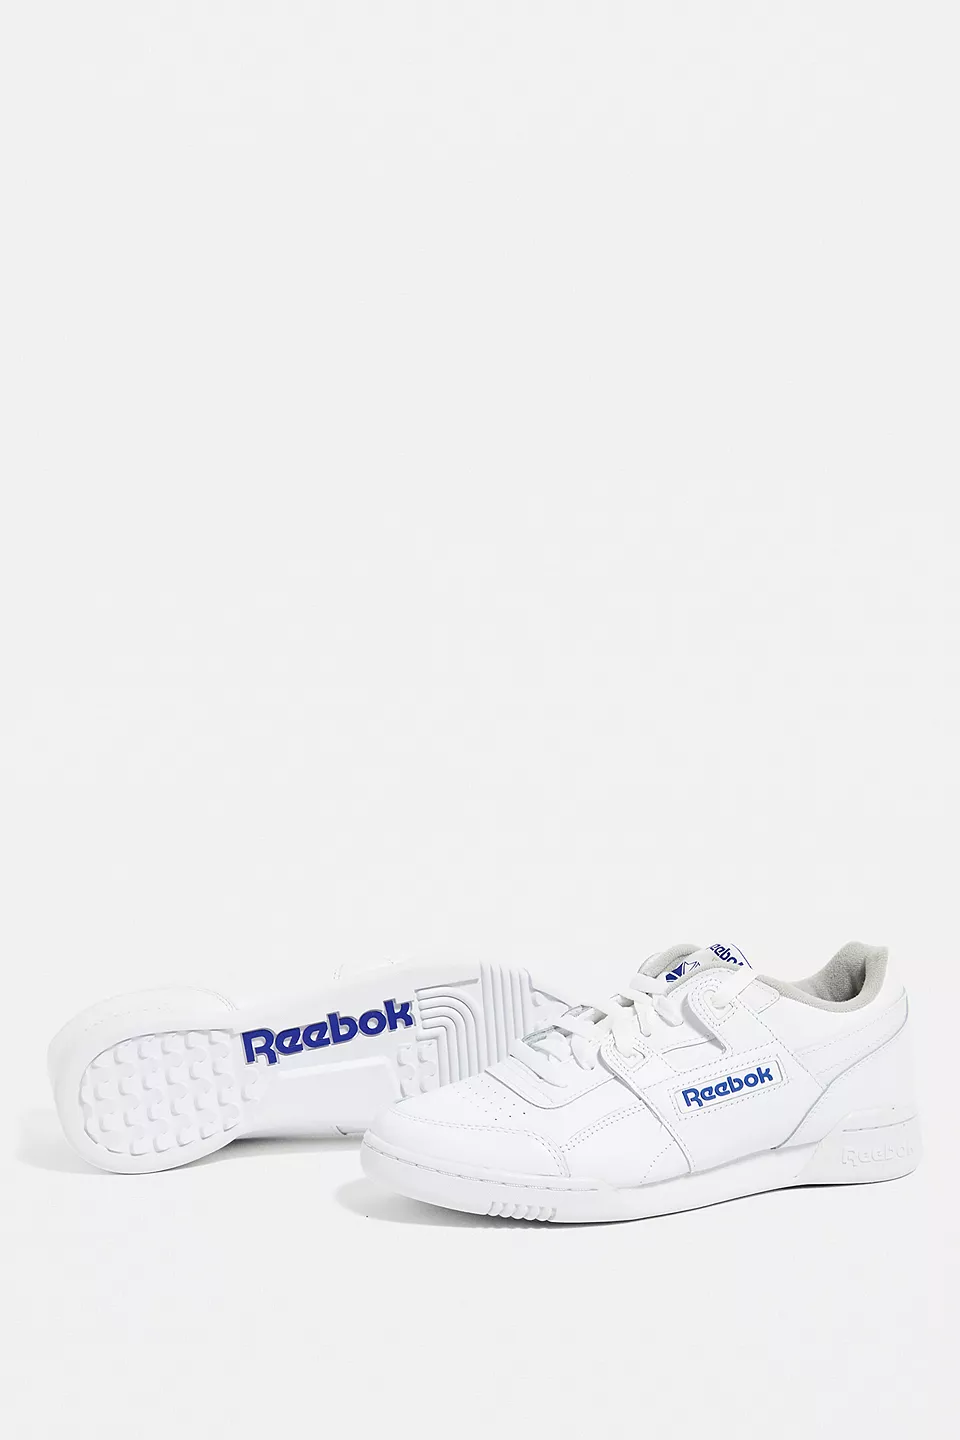 urbanoutfitters.com | Reebok Workout Plus White Trainers